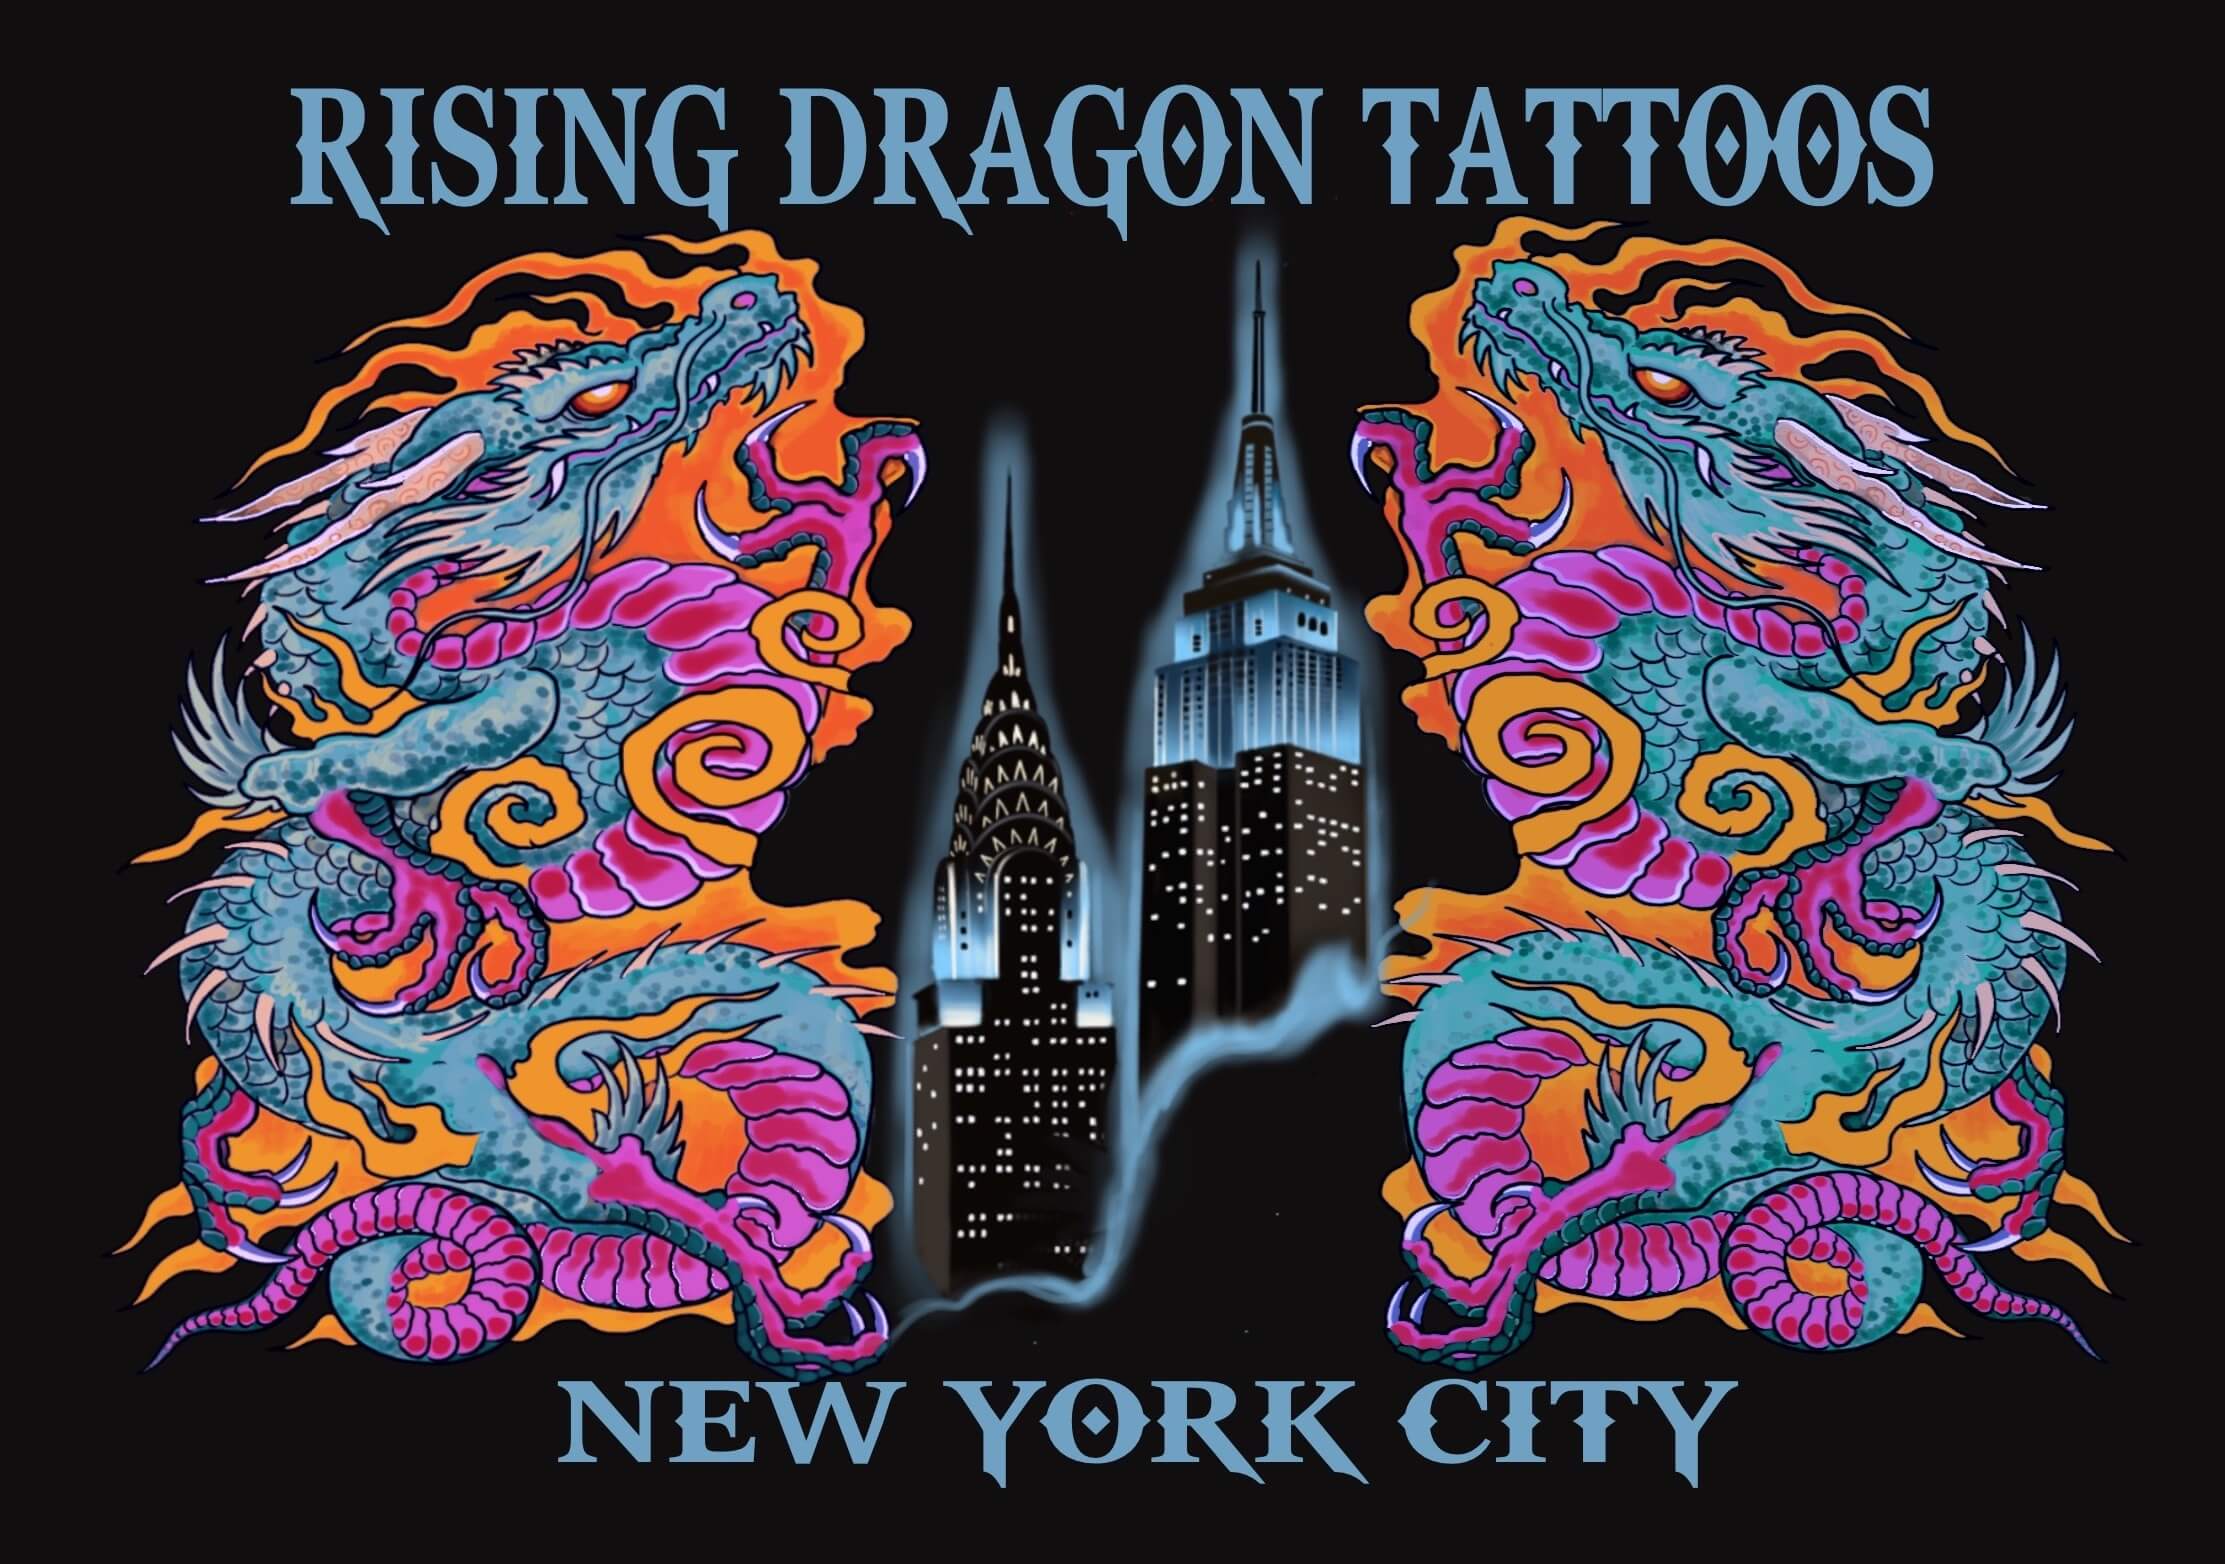 Rising Dragon Tattoos, NYC, One Of The Best Tattoo Shops In NYC